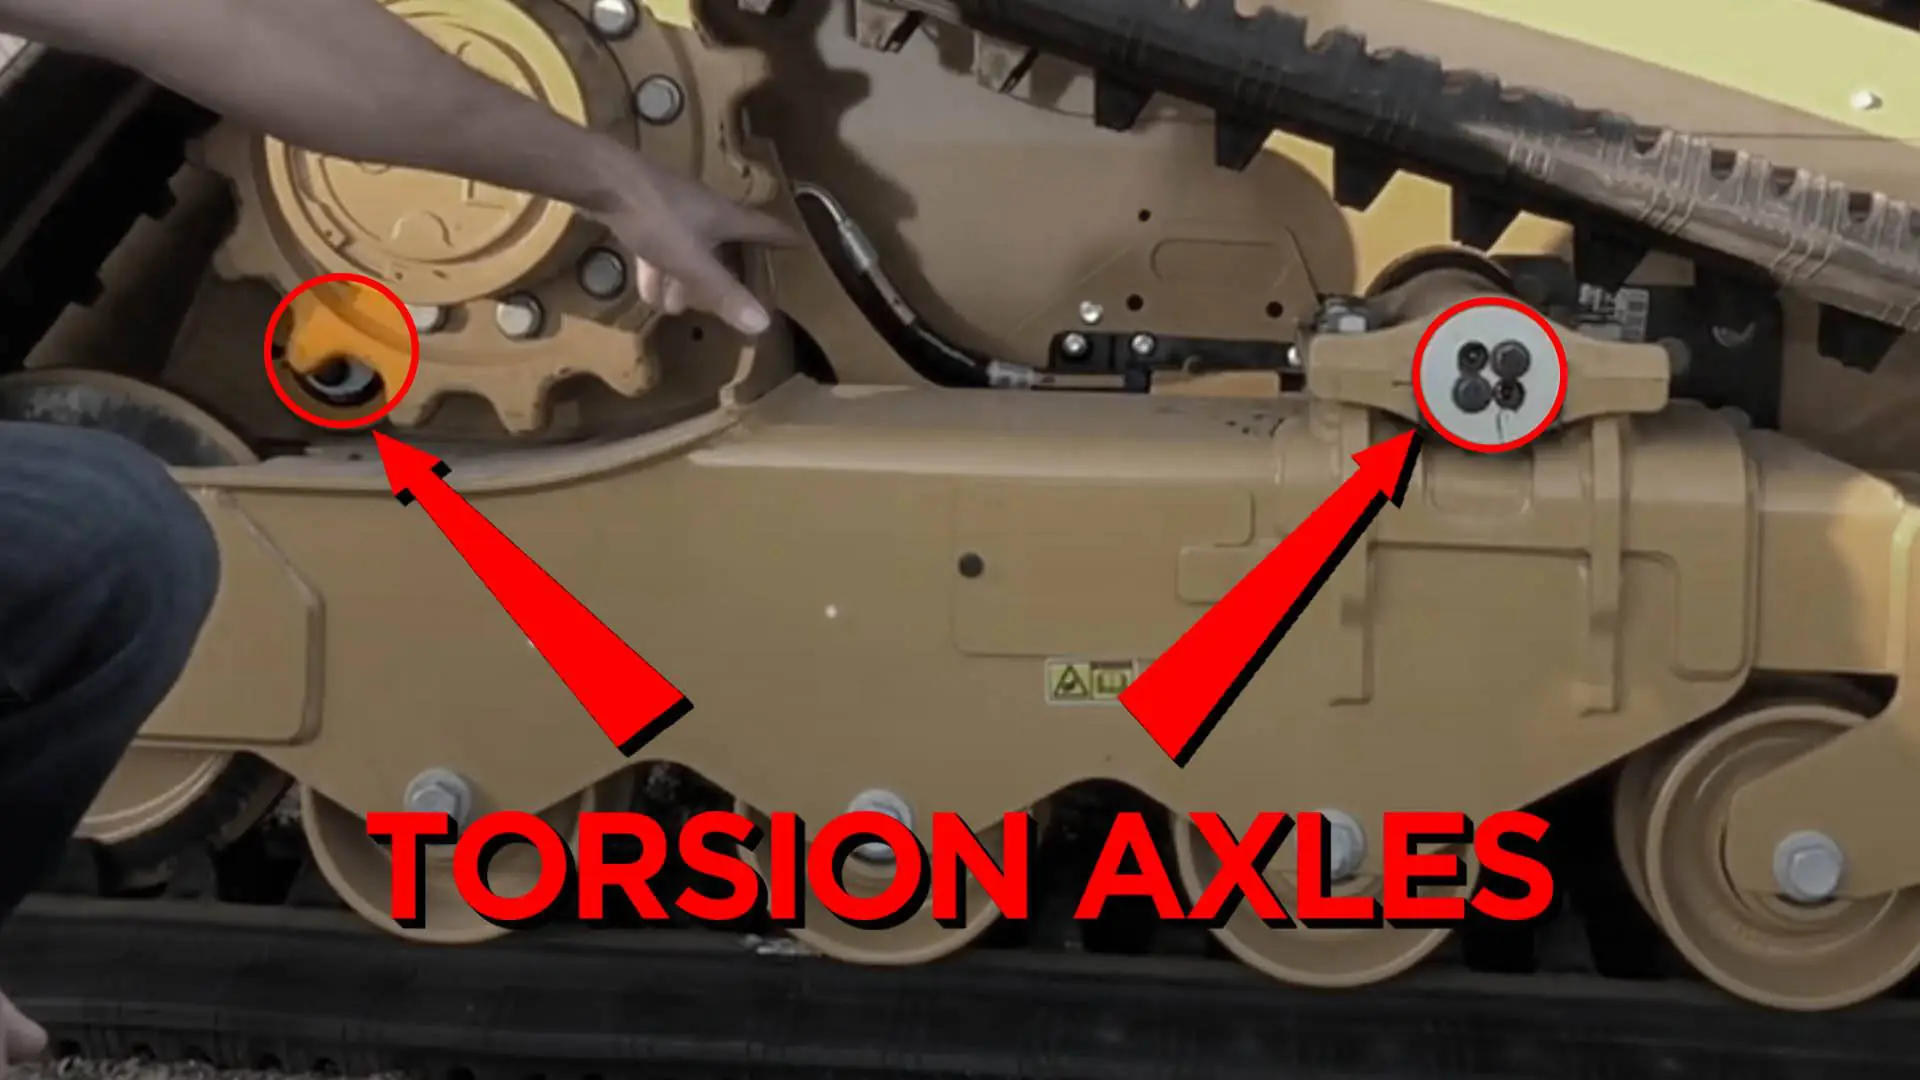 Arrows show the location of the torsion axles of the Cat 259D3.